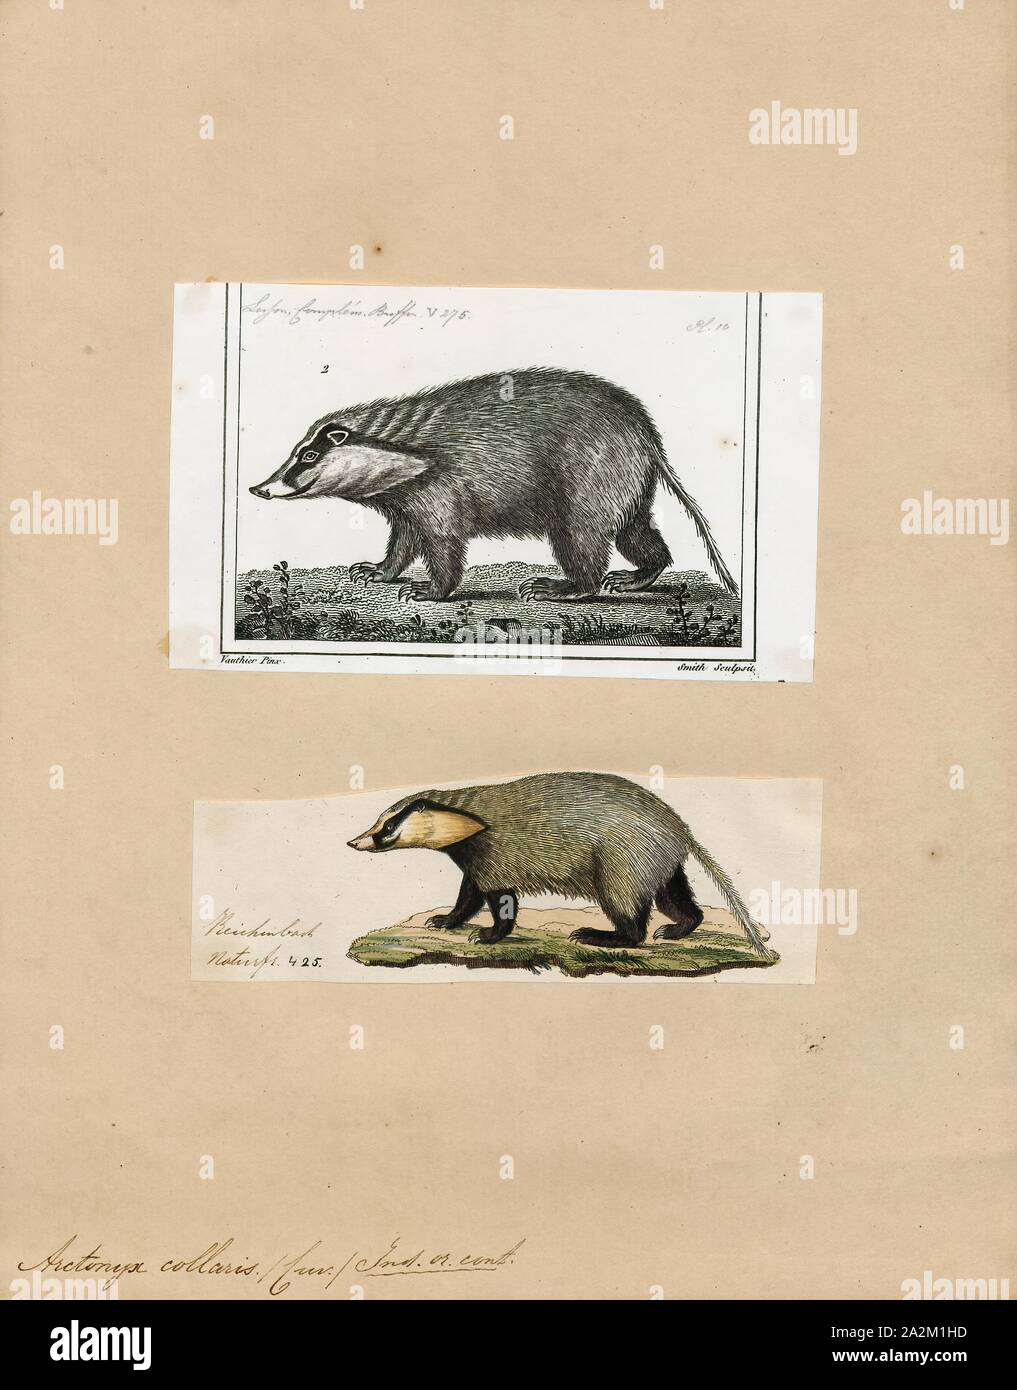 Arctonyx collaris, Print, The hog badger (Arctonyx collaris), also known as the greater hog badger, is a terrestrial mustelid native to Central and Southeast Asia. It is listed as Vulnerable in the IUCN Red List of Threatened Species because the global population is thought to be declining due to high levels of poaching., 1700-1880 Stock Photo